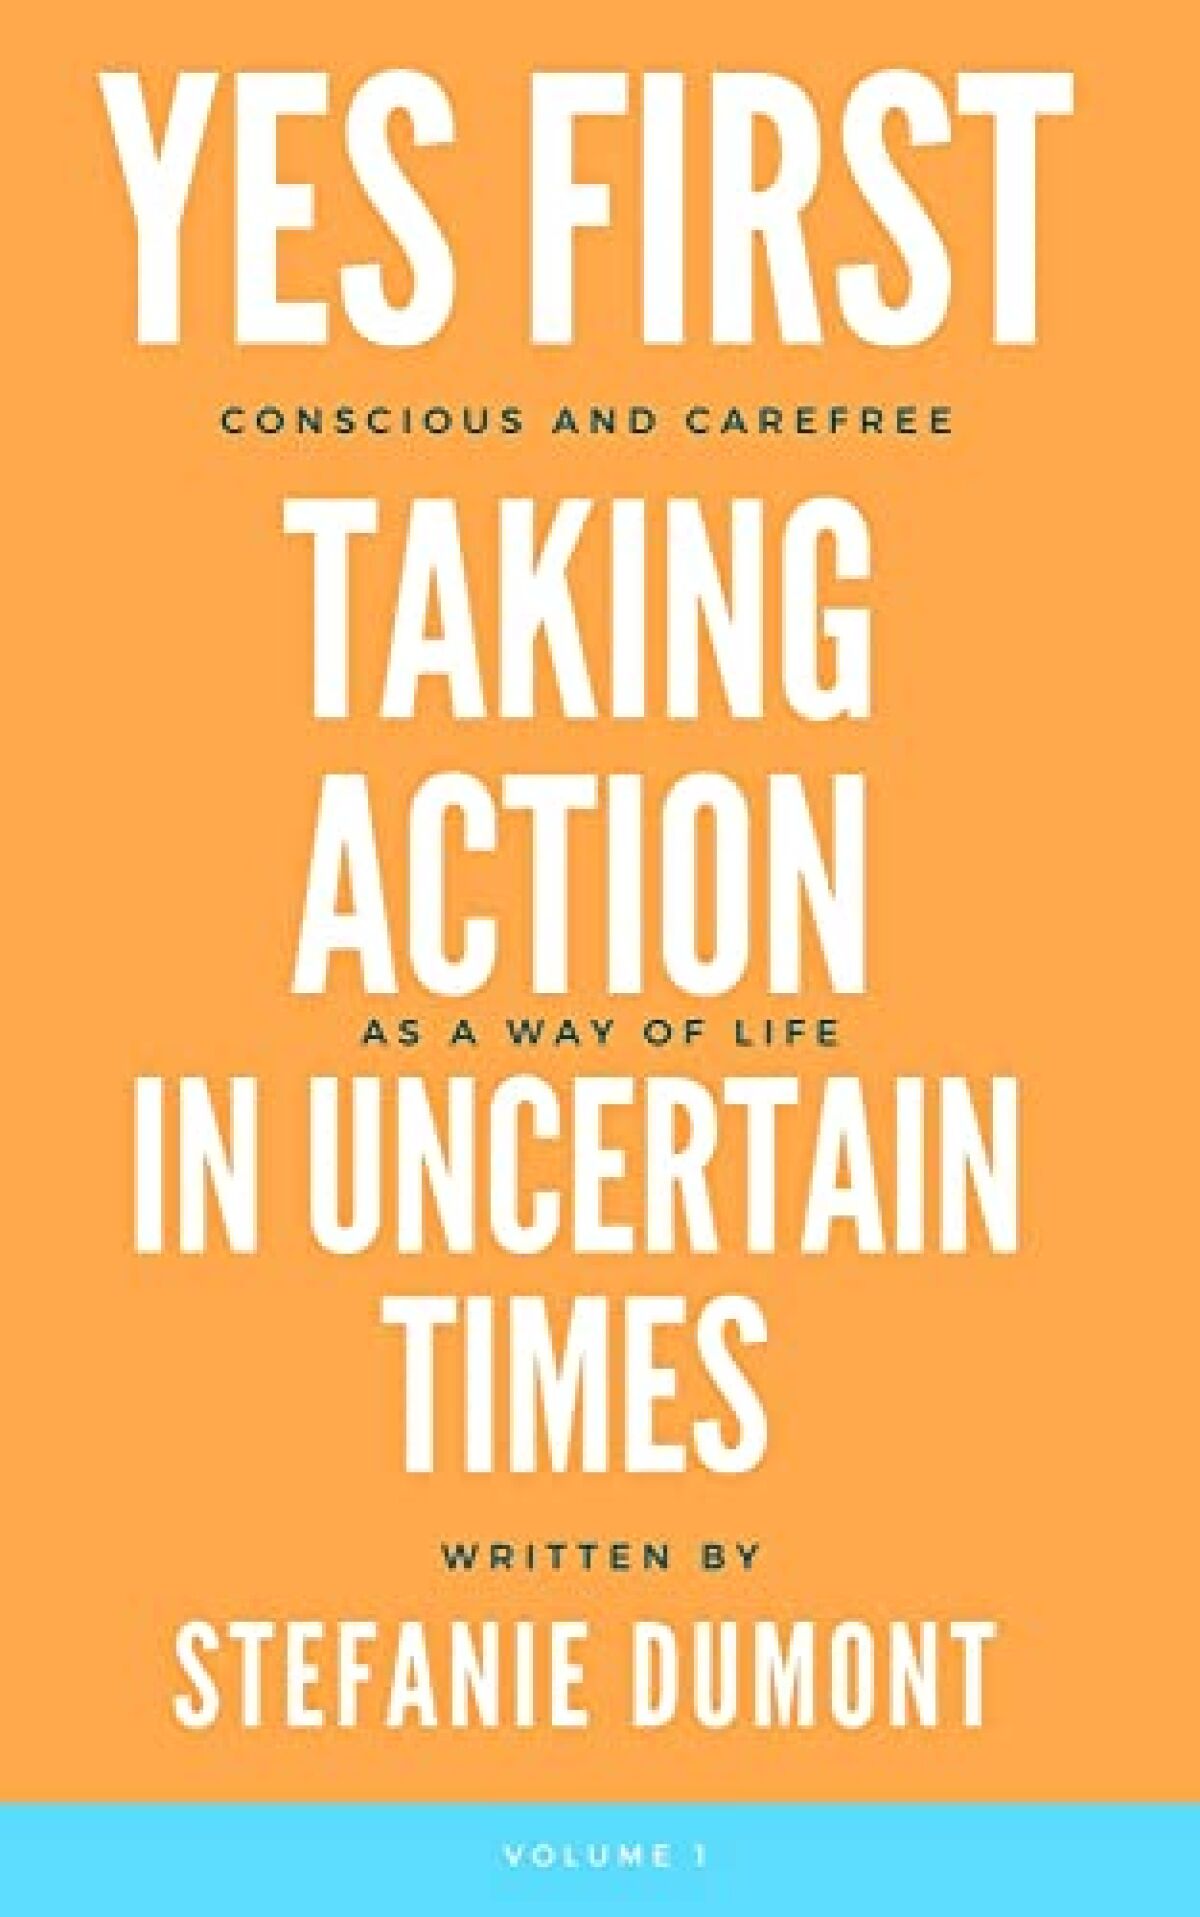 The cover of “Yes First – Taking Action in Uncertain Times” by Stefanie Dumont.